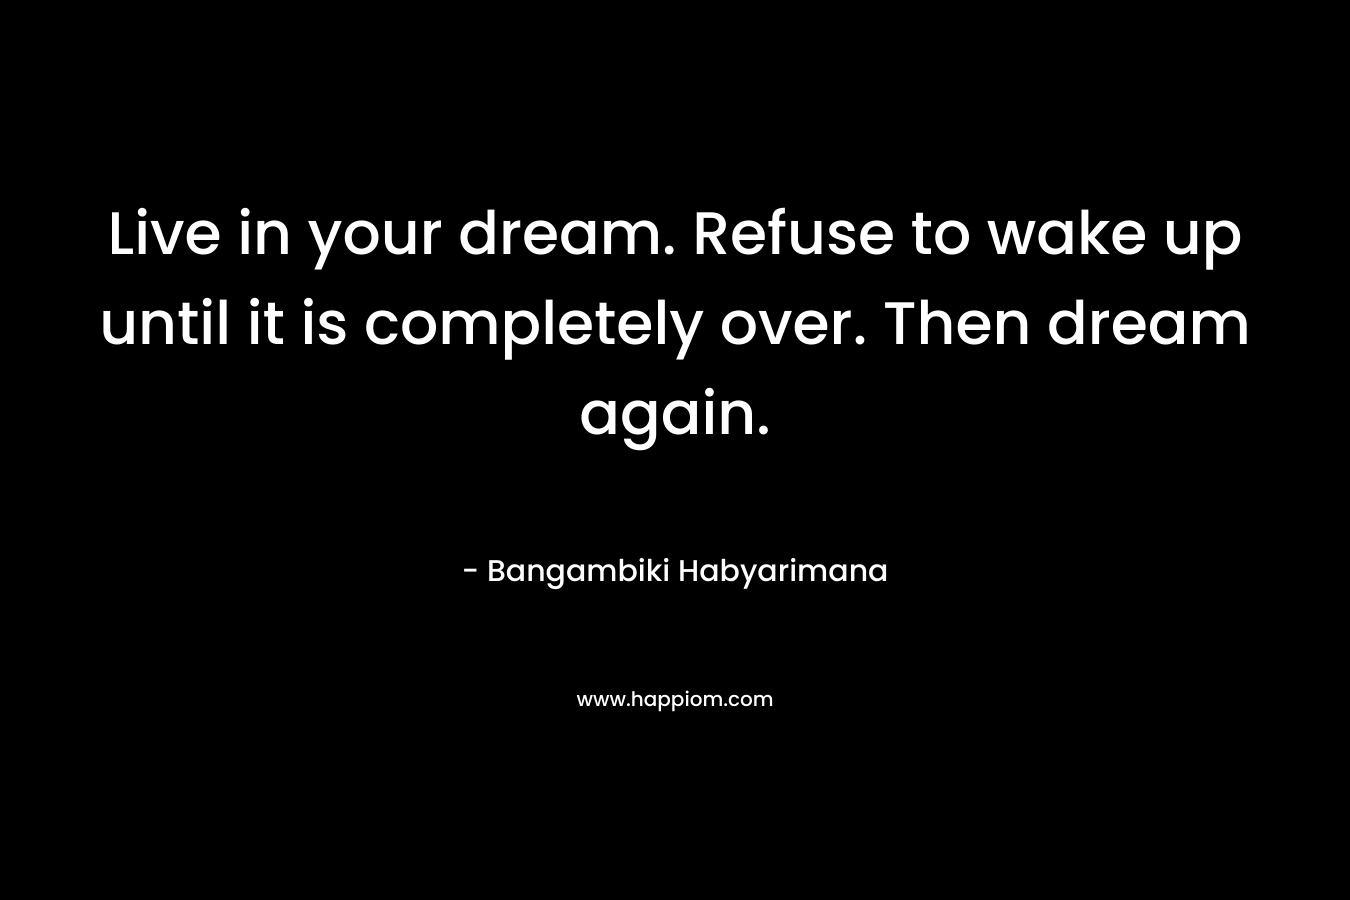 Live in your dream. Refuse to wake up until it is completely over. Then dream again.